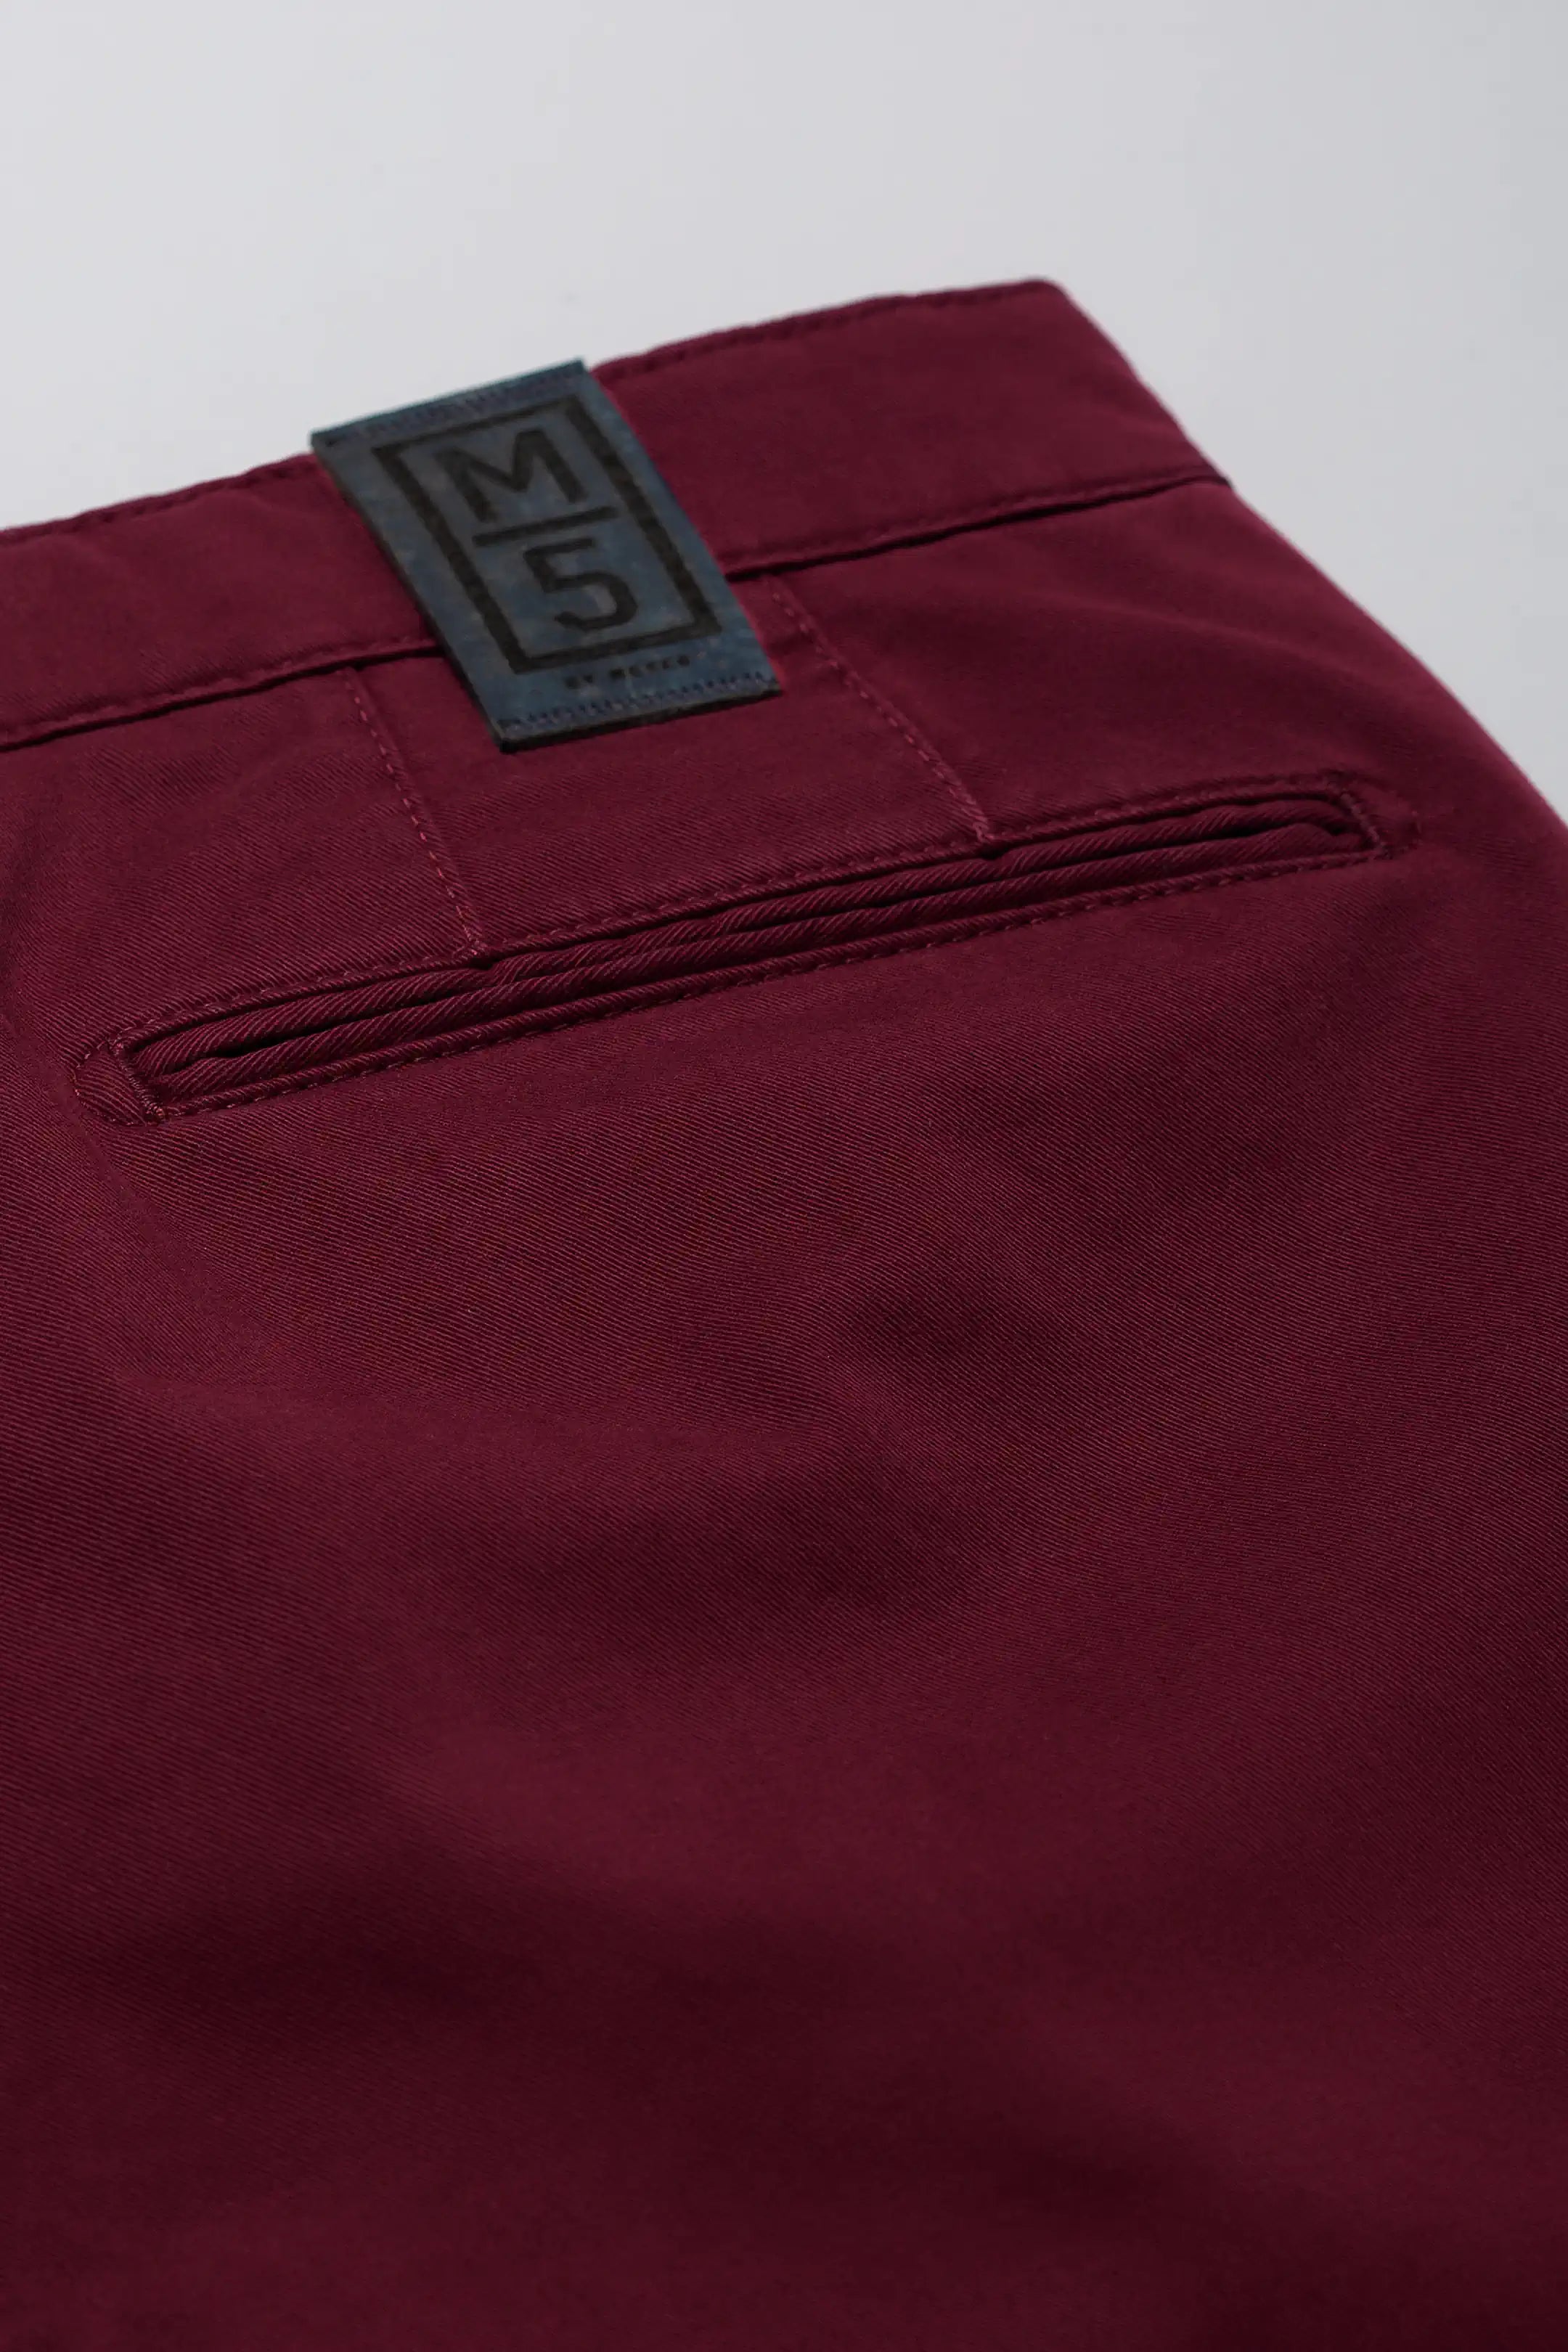 MEYER M5 Trousers - 6001 Soft Stretch Cotton Chinos - Bordeaux